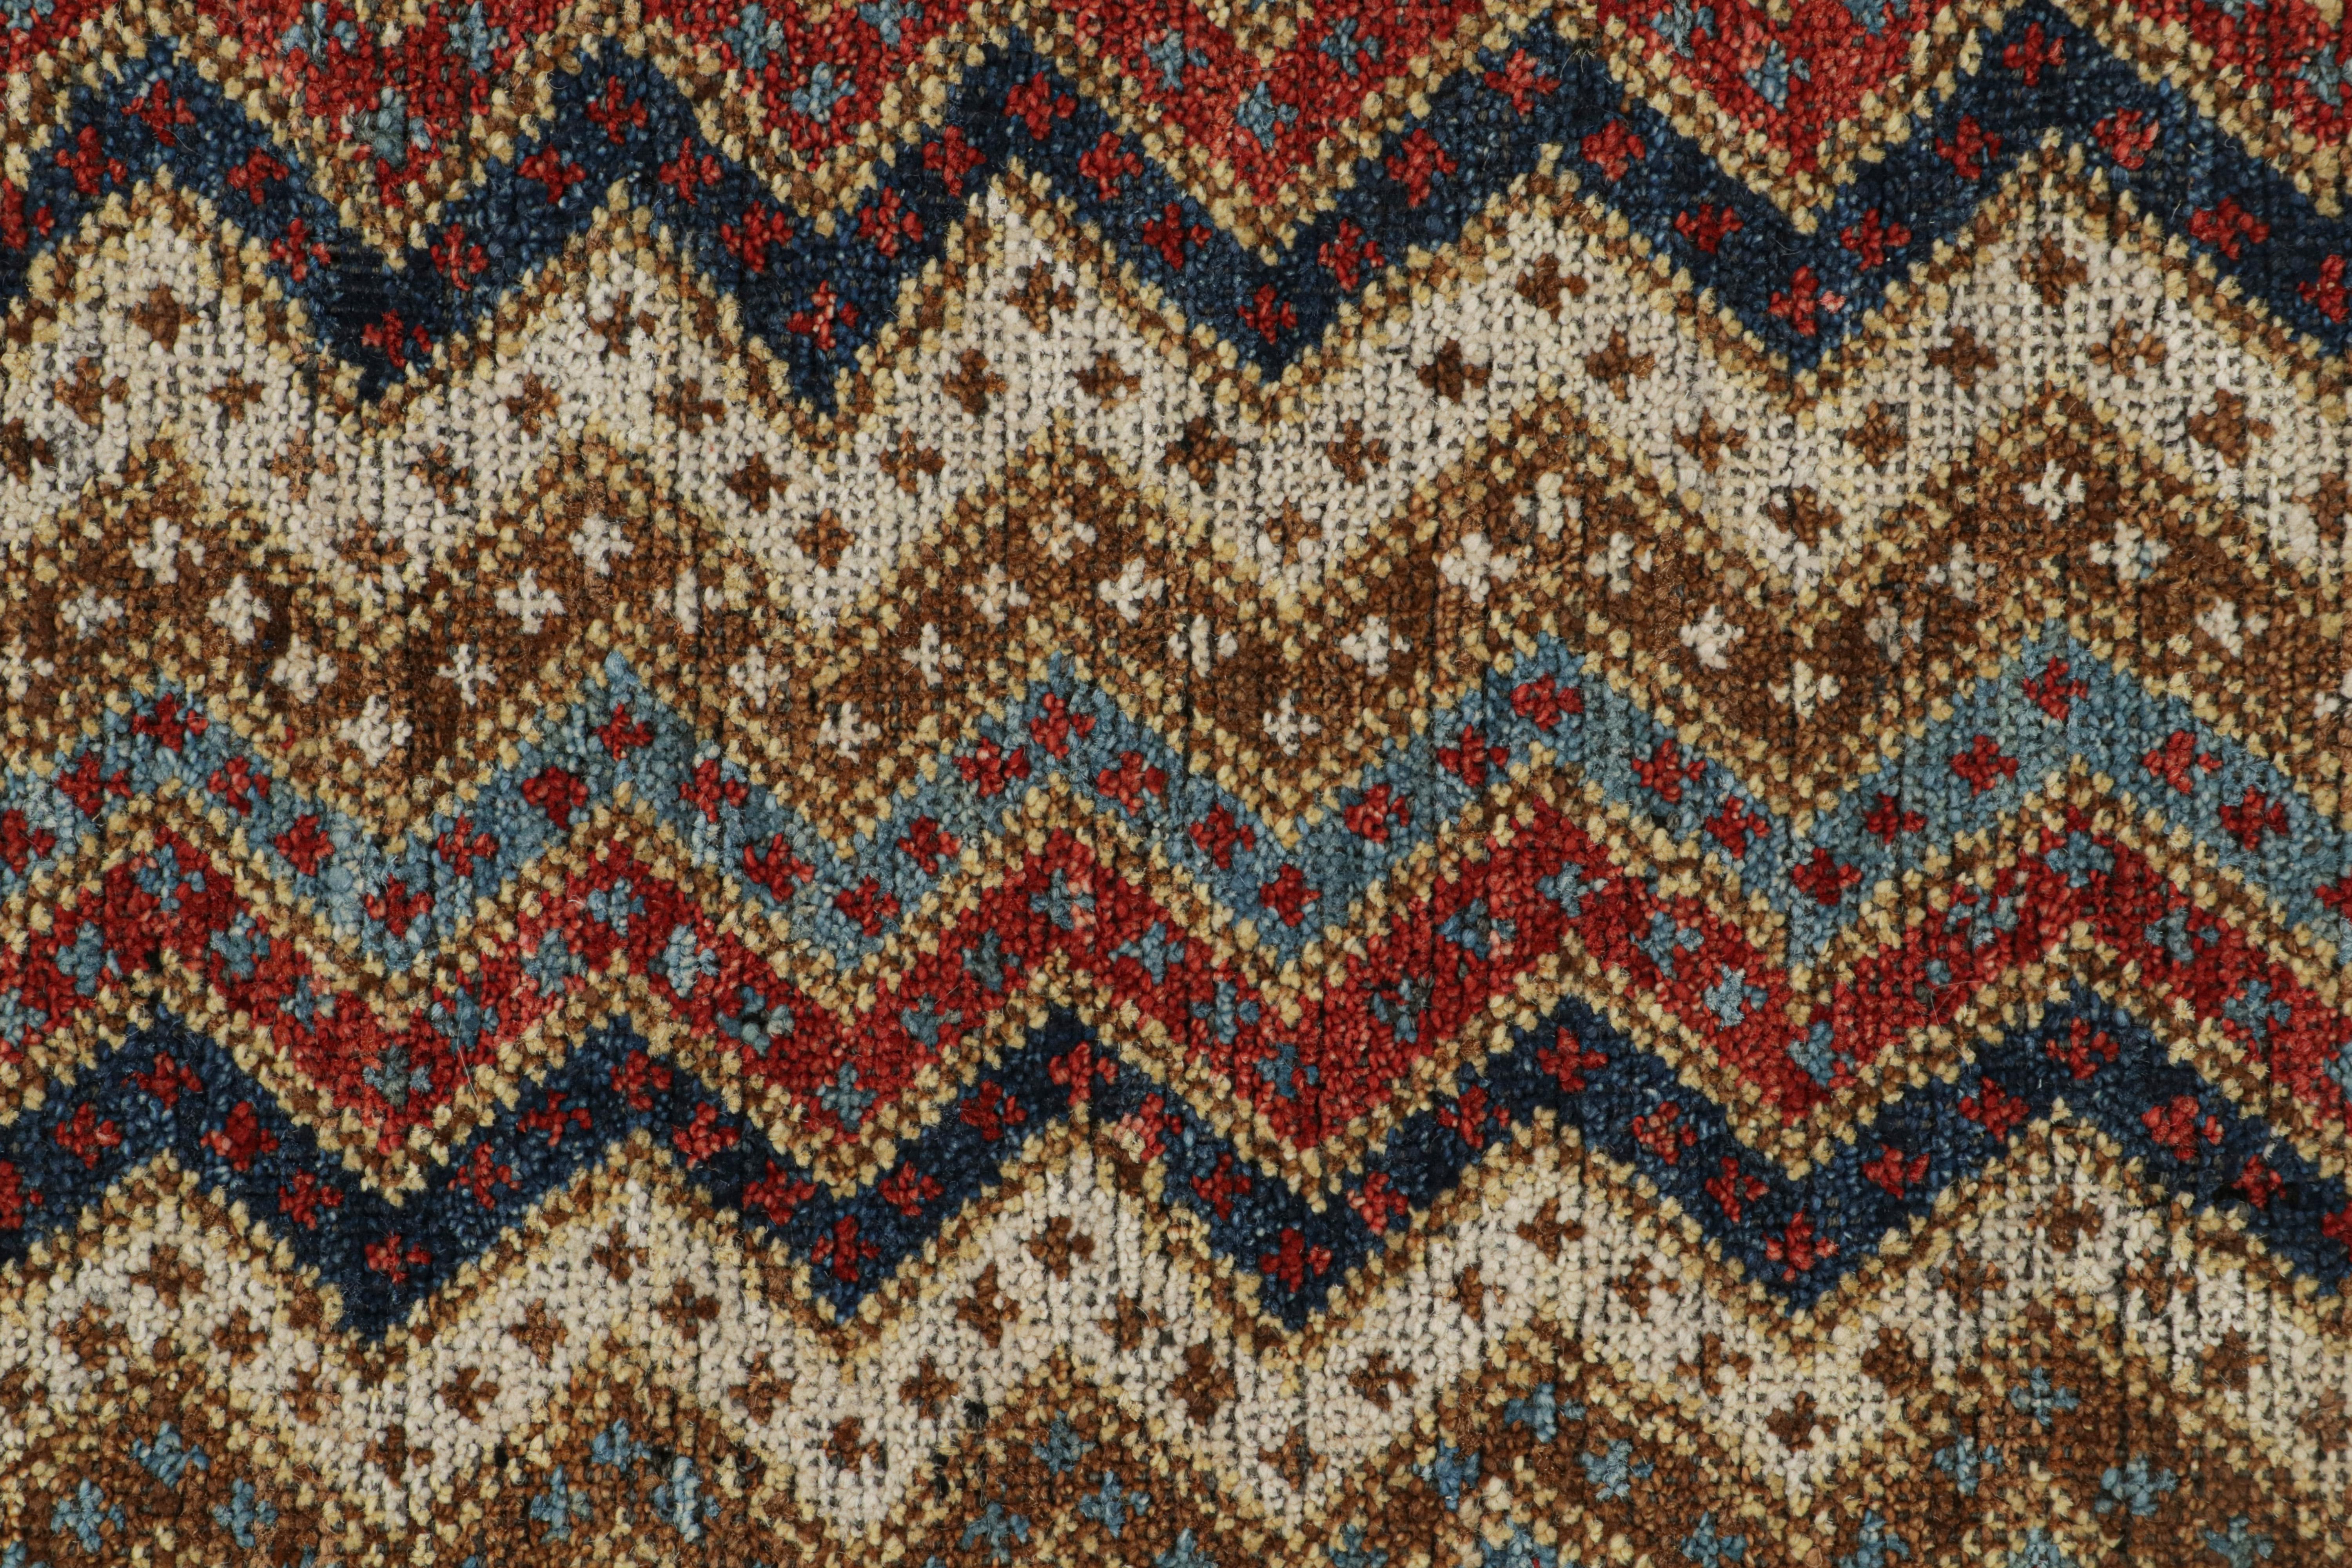 Rug & Kilim's Antique Tribal Style Rug in Red, Blue and Beige-Brown Chevrons (Tapis ancien de style tribal à chevrons rouges, bleus et beige-brun) Neuf - En vente à Long Island City, NY